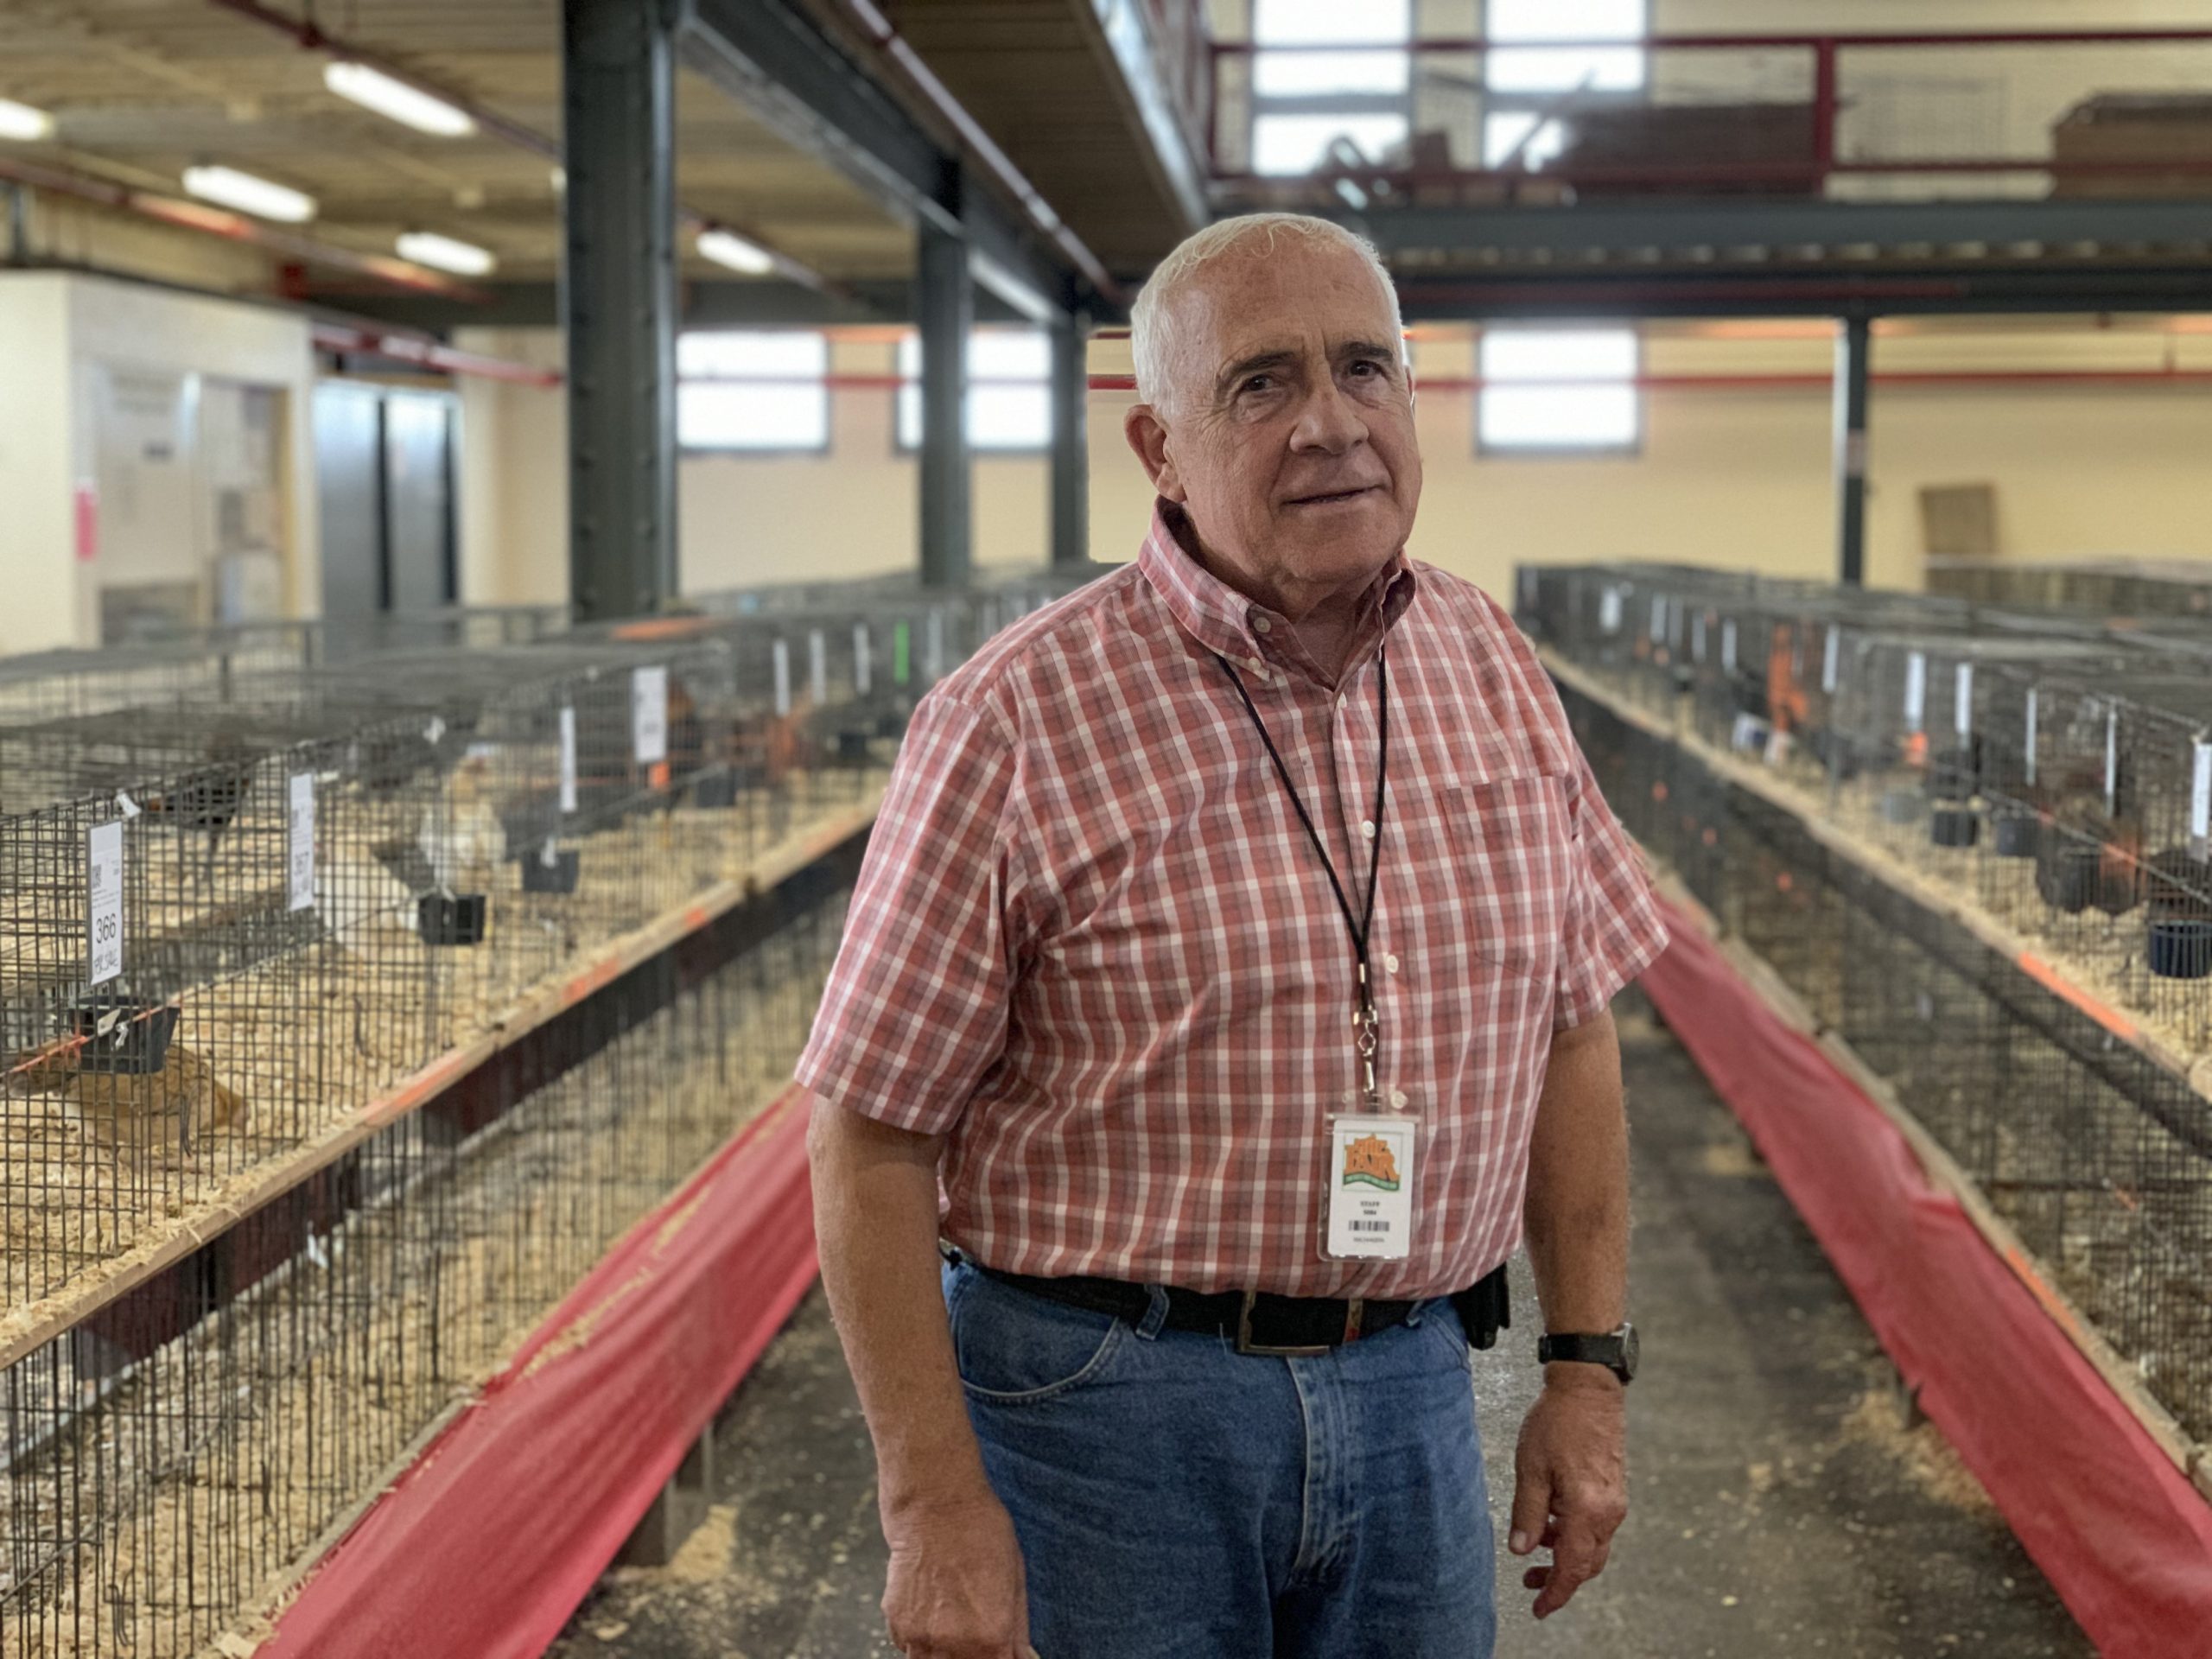 John Pierce, superintendent of the Poultry Building, poses in front of the flocks of chickens and ducks at the New York State Fairgrounds.